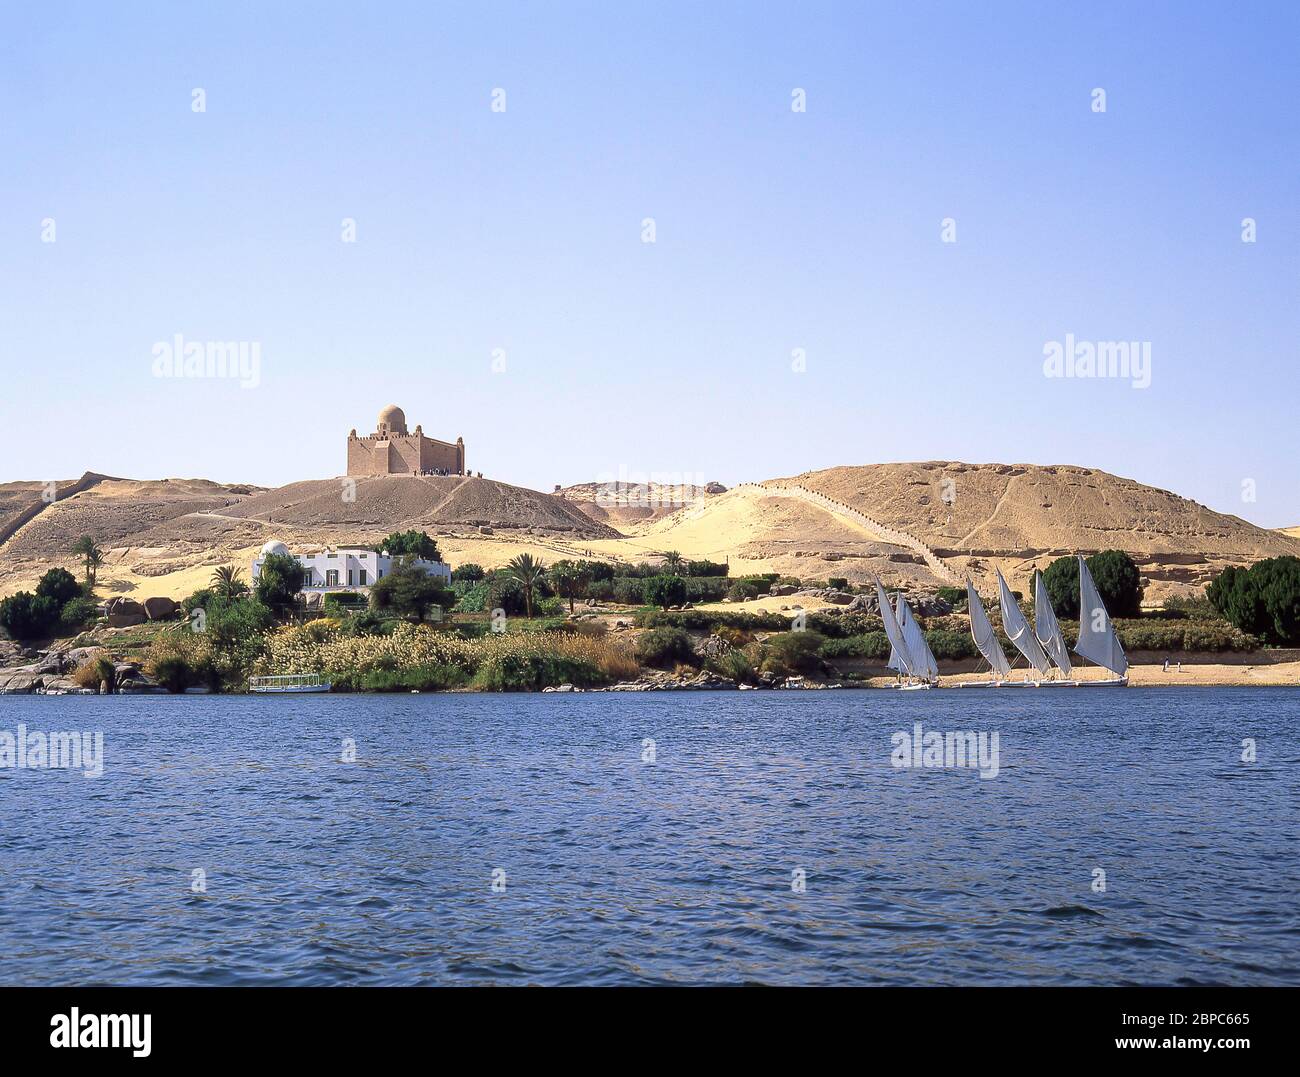 Feluccas and Mausoleum of Aga Khan on bank of River Nile at Aswan, Aswan Governorate, Republic of Egypt Stock Photo